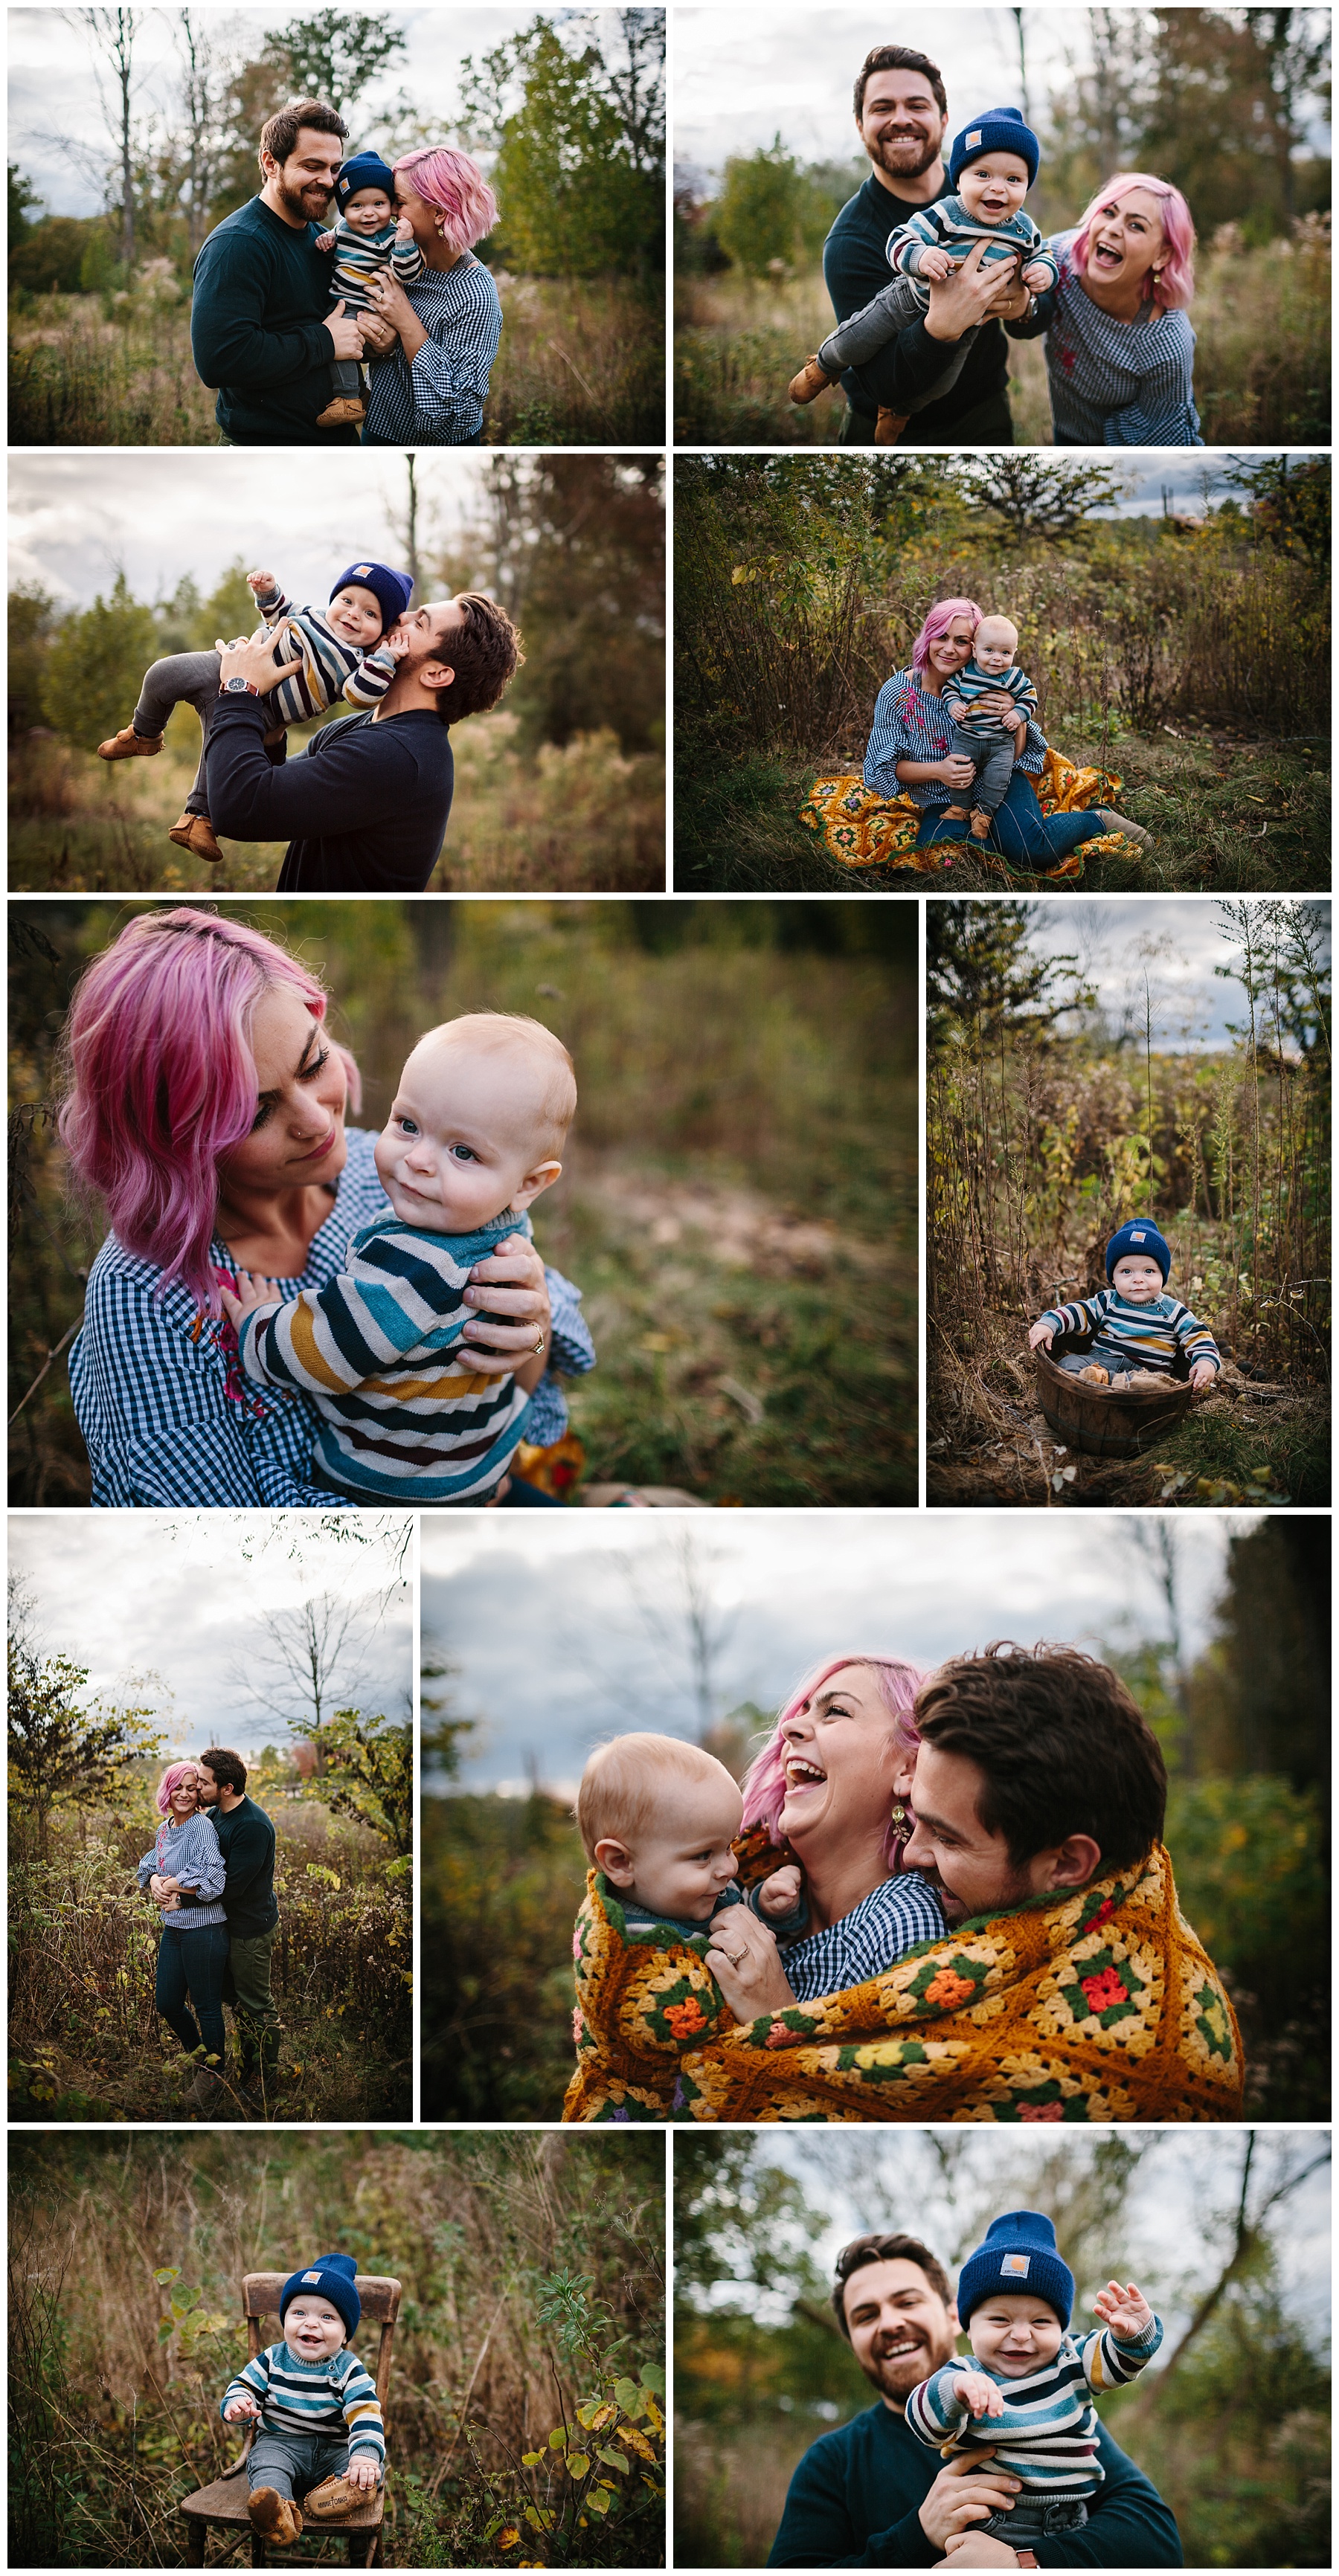 Jack and Family | Western Chicago Family Photographer | Patricia Anderson Photography